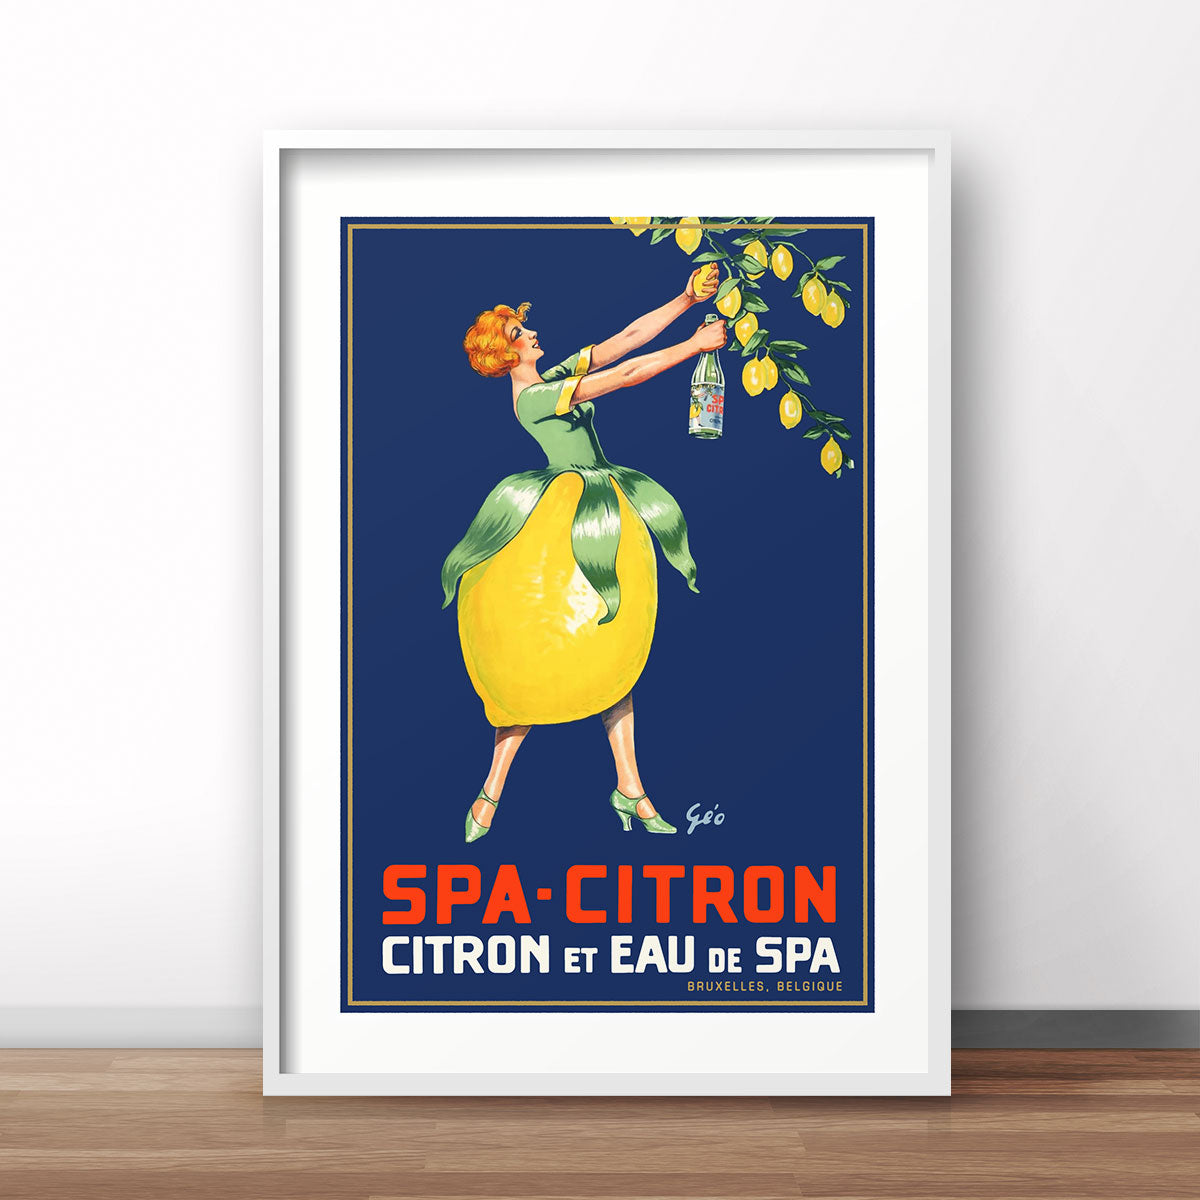 Spa Citron Belgium advertising poster print from Places We Luv